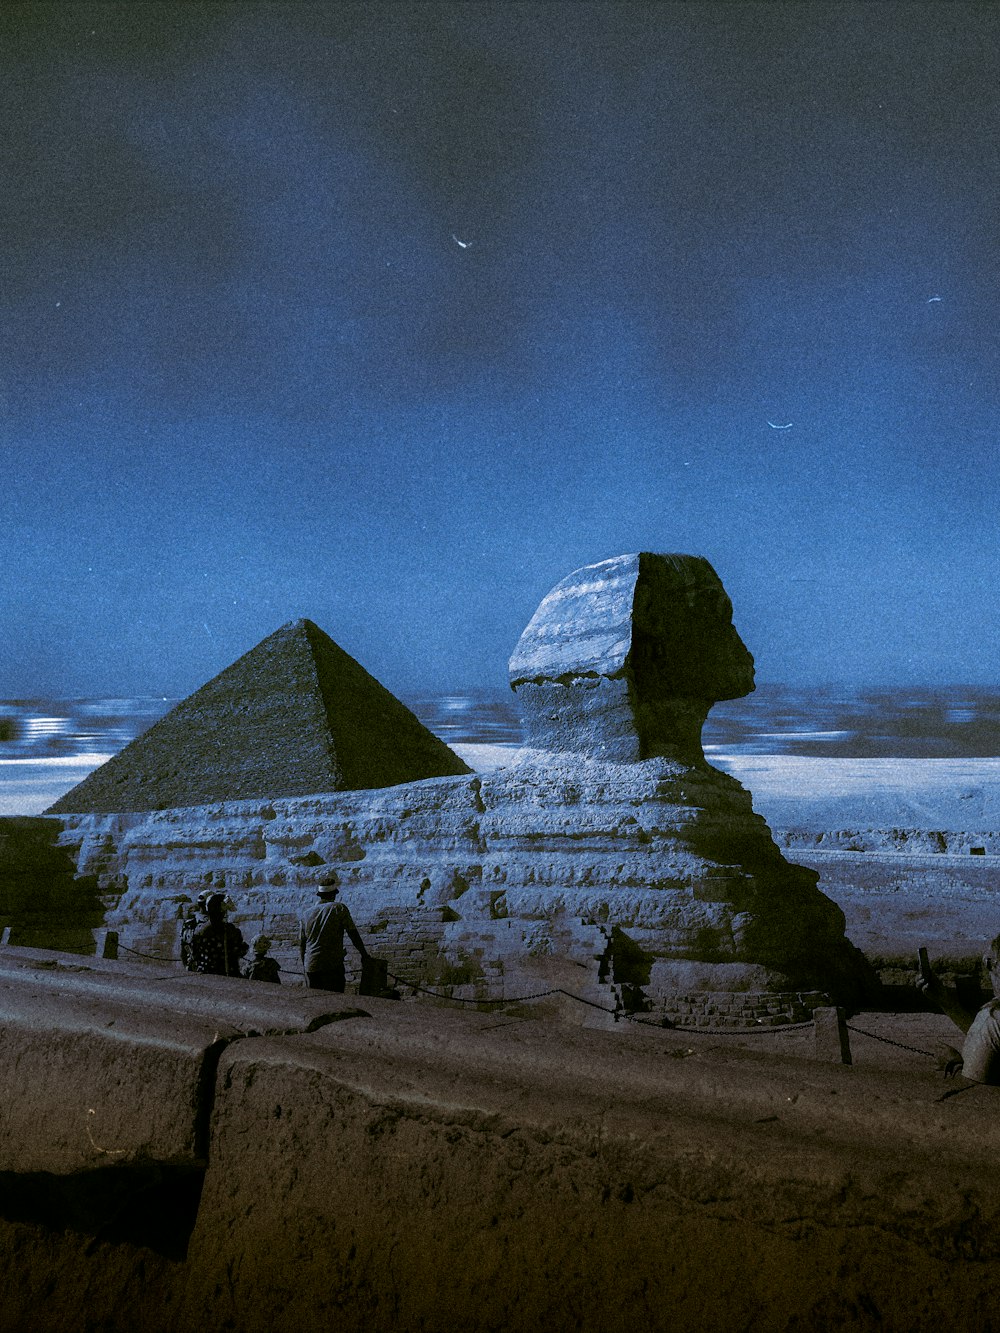 a group of people standing in front of a large sphinx